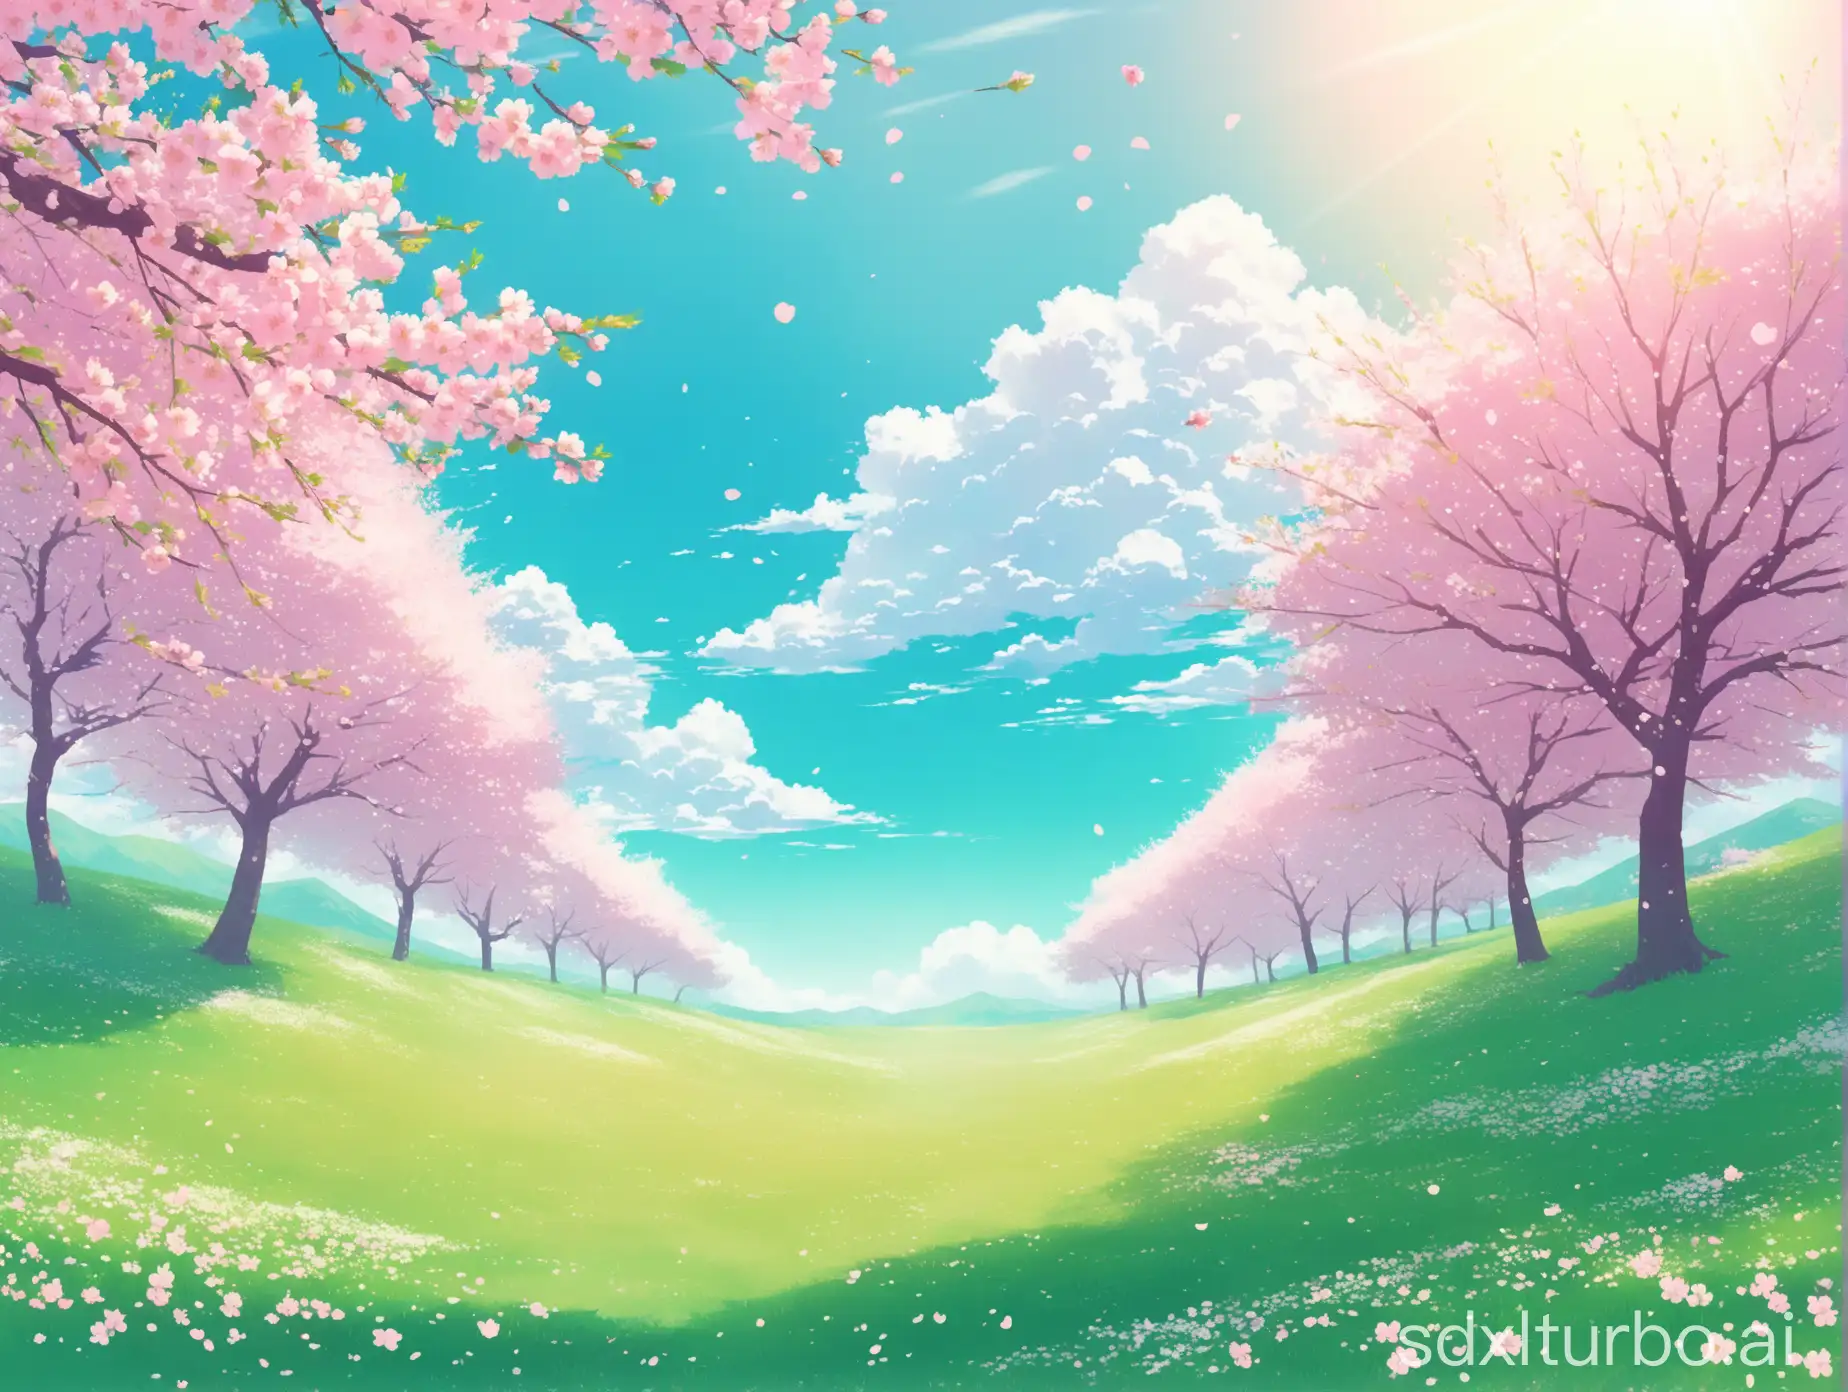 A serene springtime landscape, vibrant blue sky with wispy clouds, blooming cherry blossom trees with pink flowers, lush green grass field dotted with small white flowers, warm sunlight, anime style, soft pastel colors, no characters